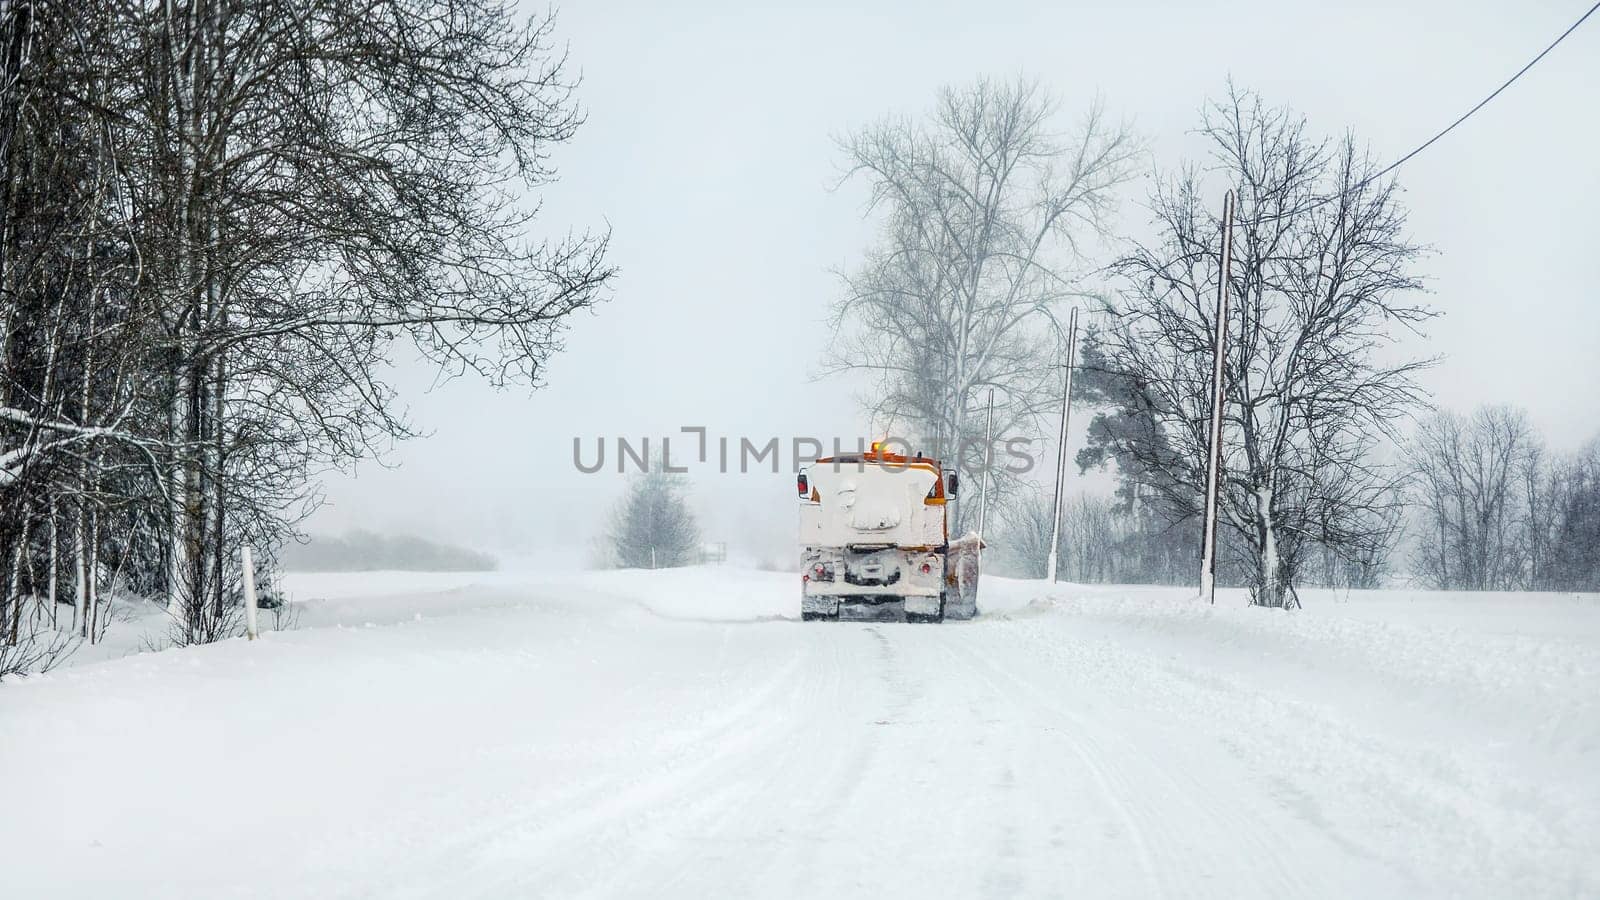 Snowplow highway maintenenace truck cleaning road completely white from snow in winter, dangerous driving conditions, view from car behind. by Ivanko